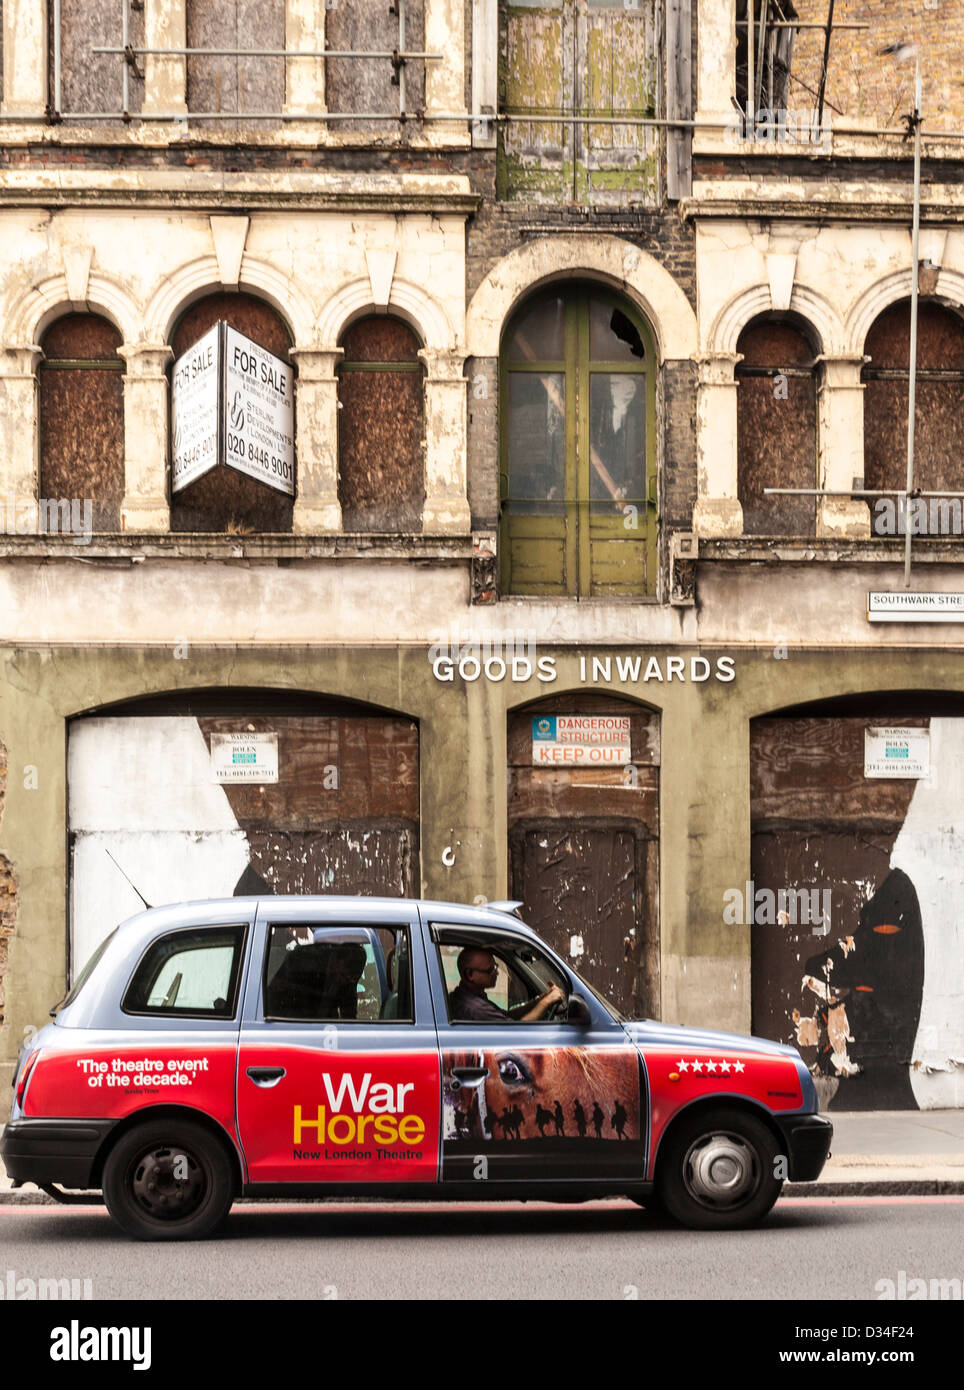 London cab driving in front of delapidated building, London, UK Stock Photo